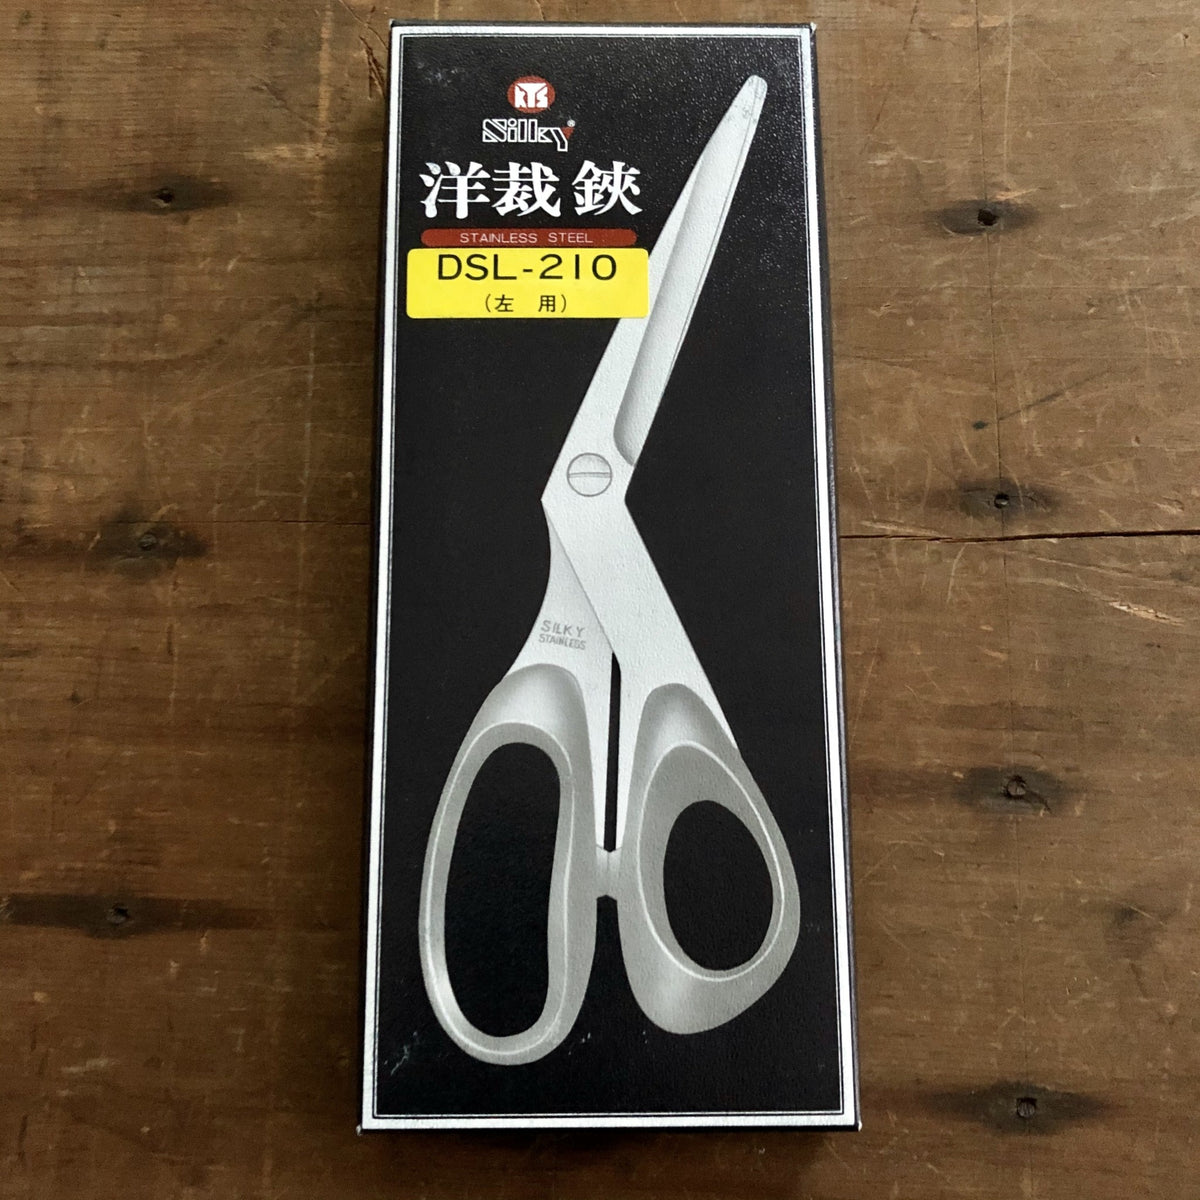 Silky 210mm Tailor Shears Stainless - LEFTY